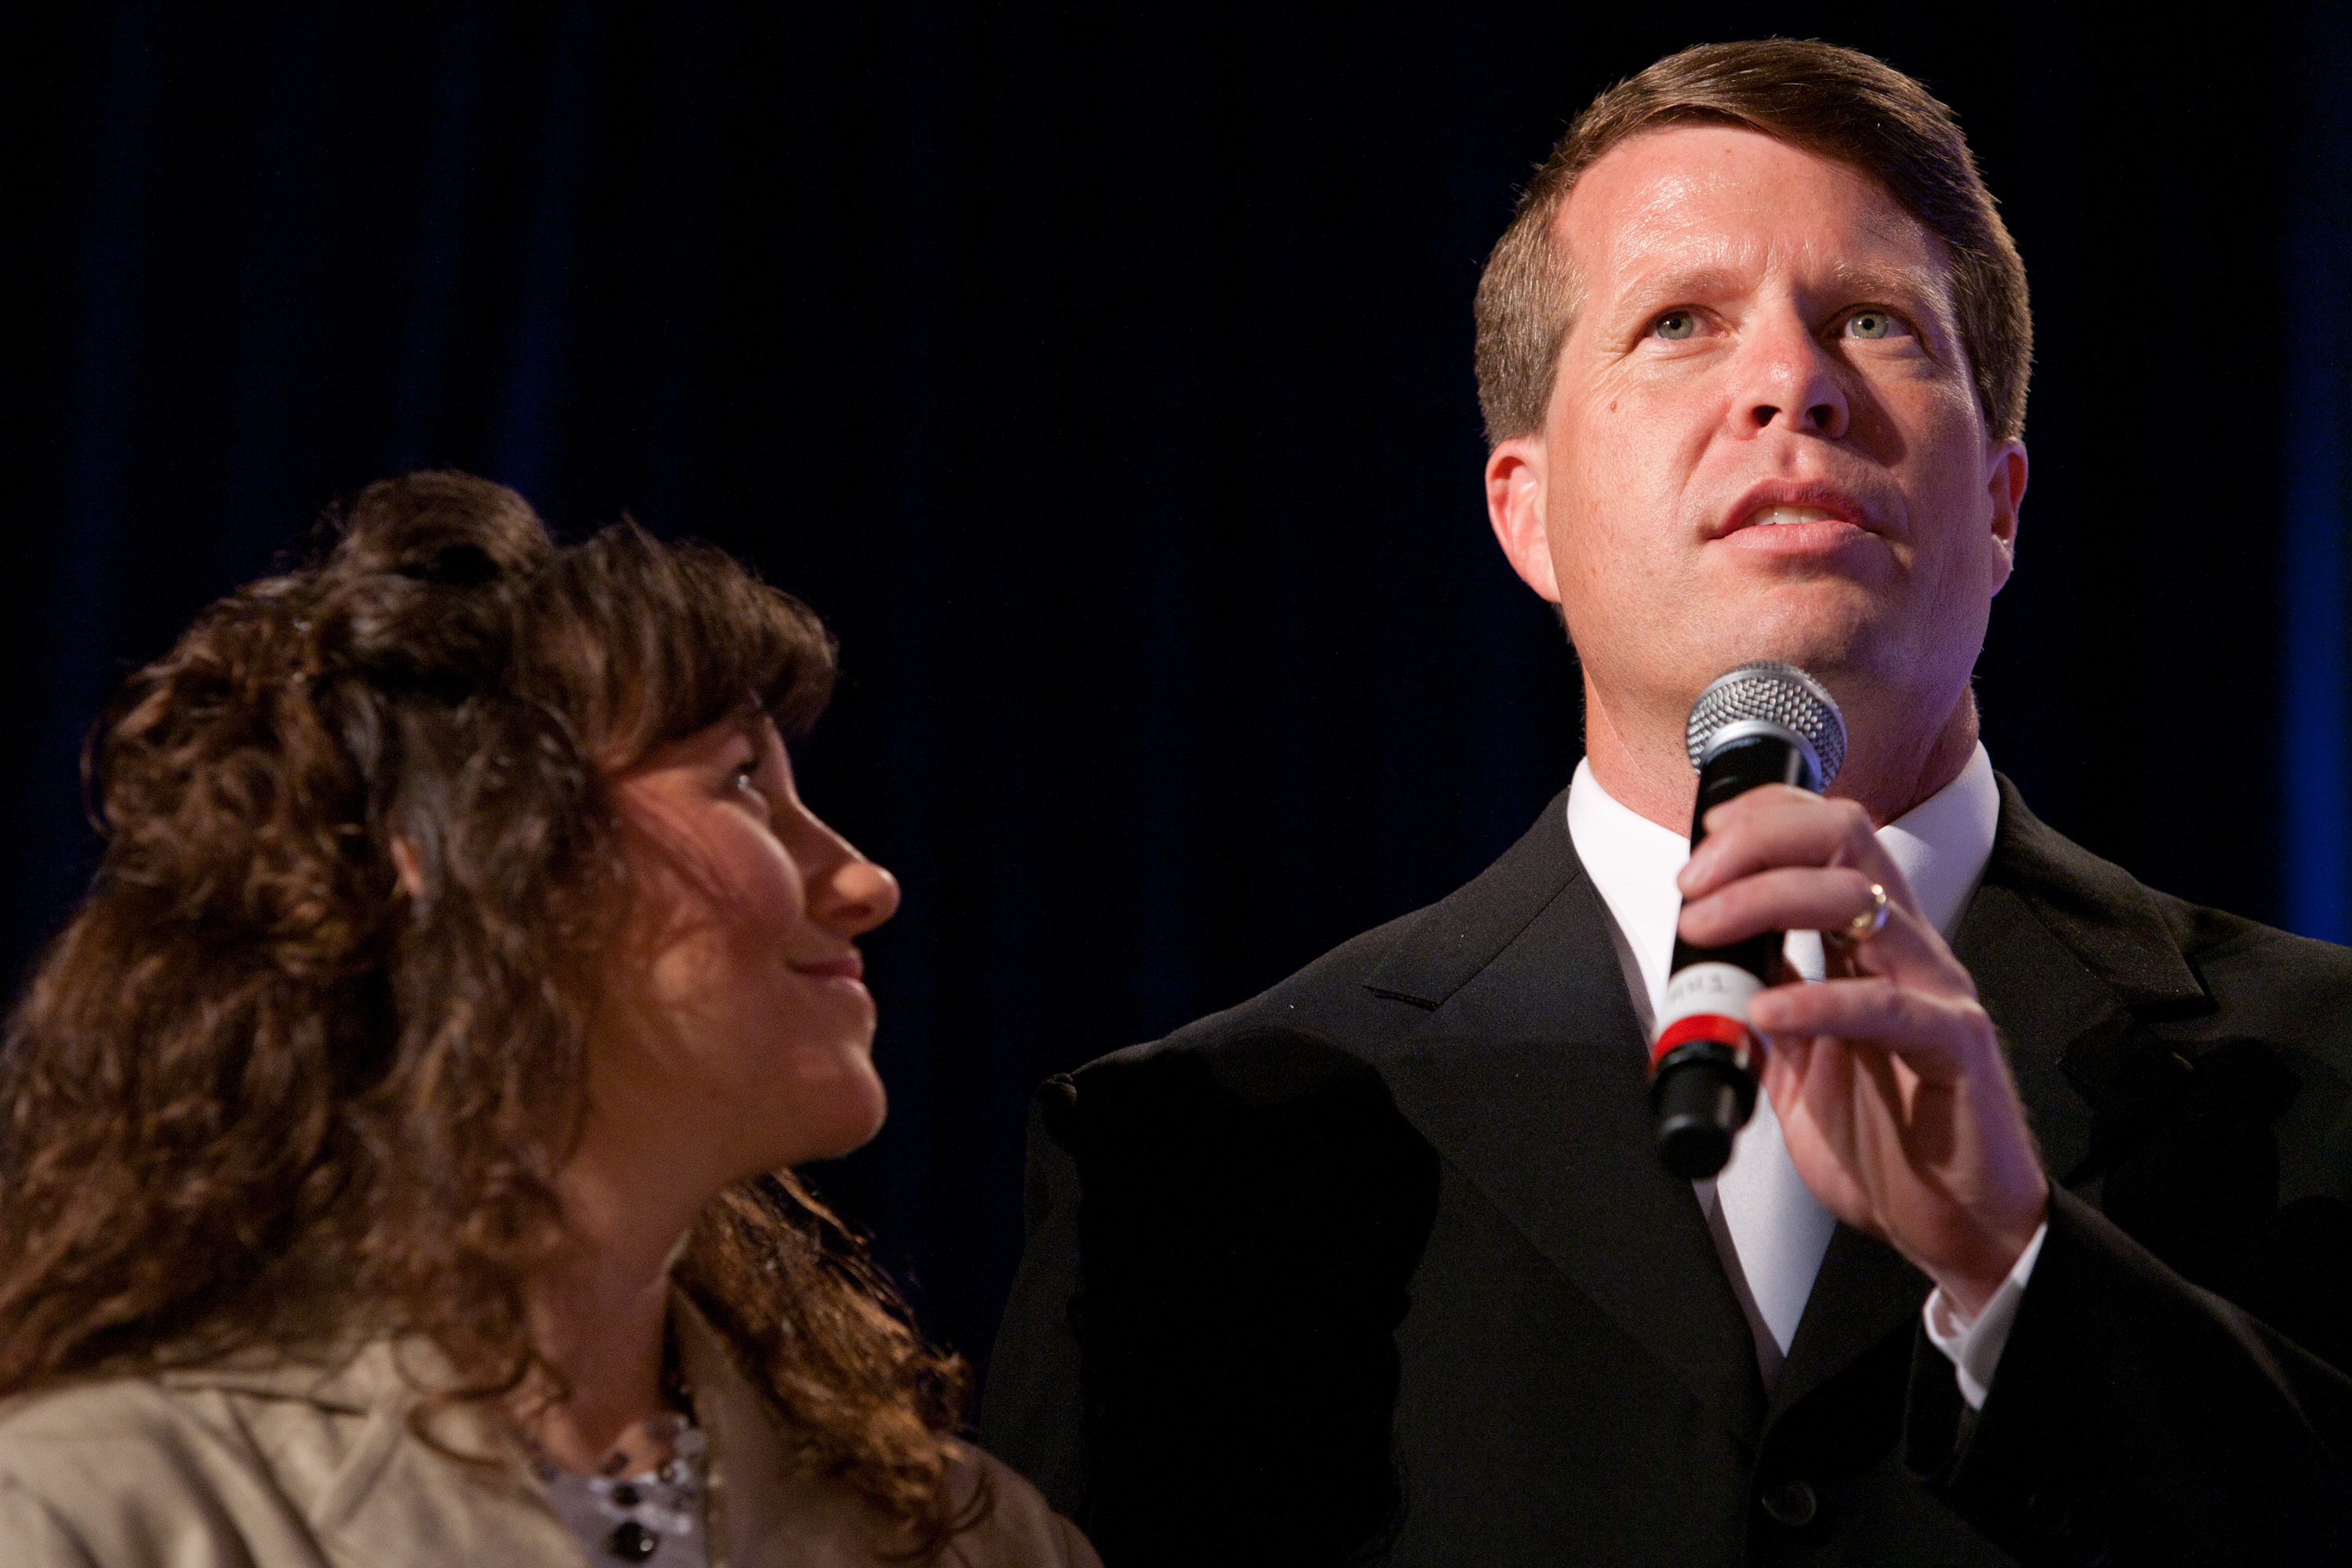 Michelle Duggar stands by while Jim Bob Duggar speaks at The Values Voter Summit